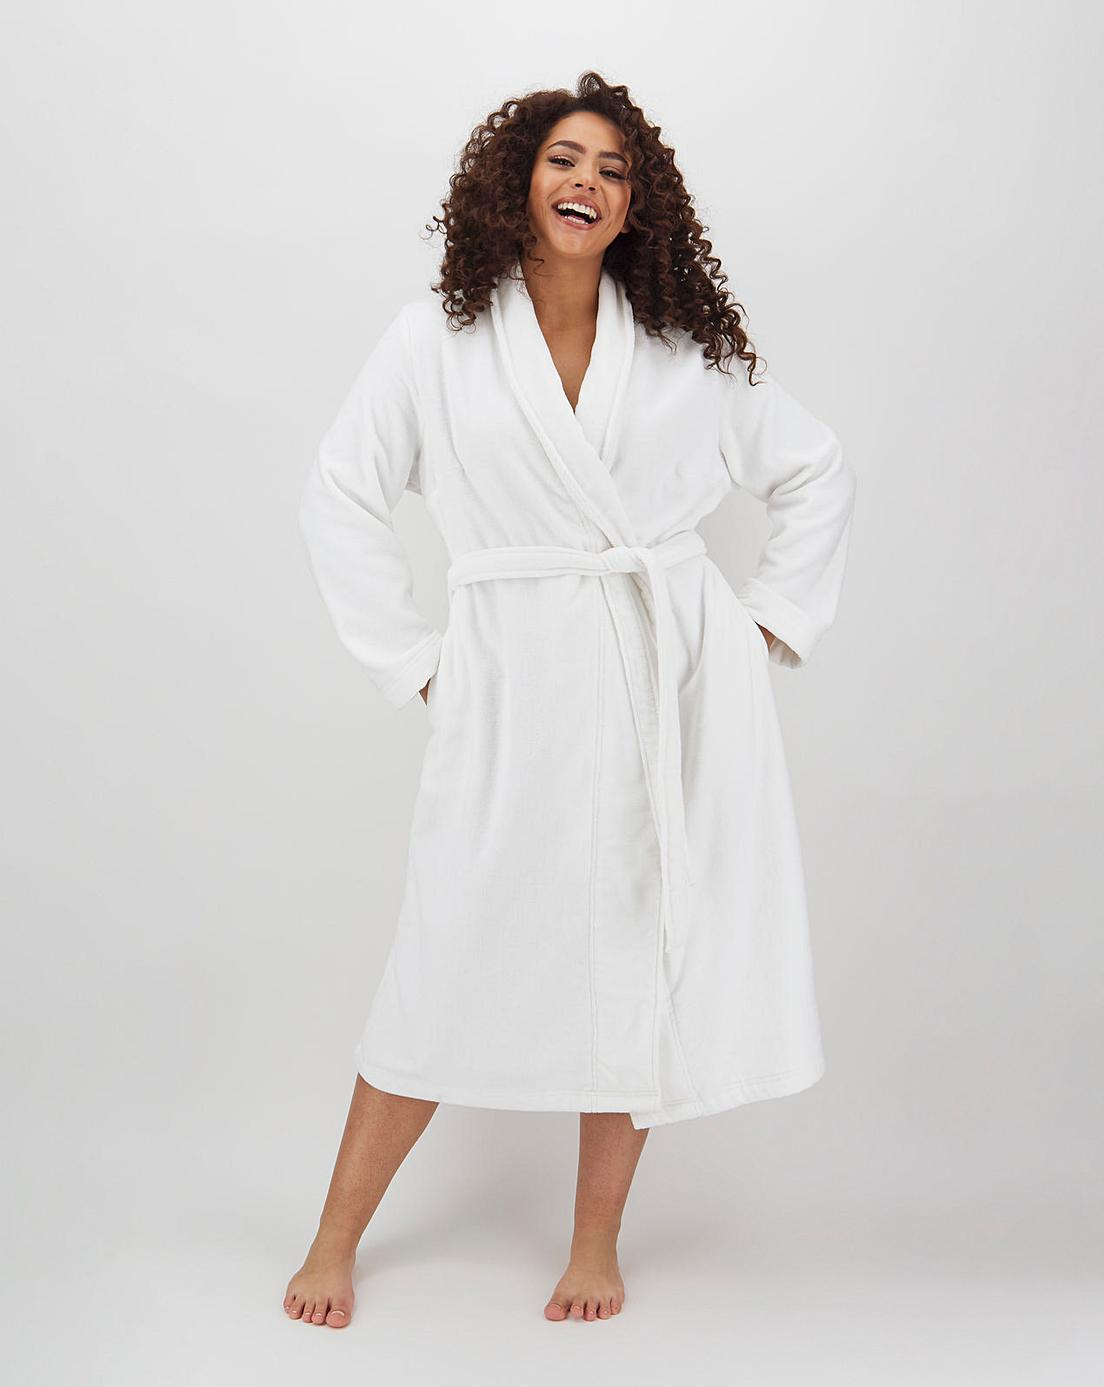 5 Plus Size Spa Robes to Take to the Spa - Plus Size Travel Too